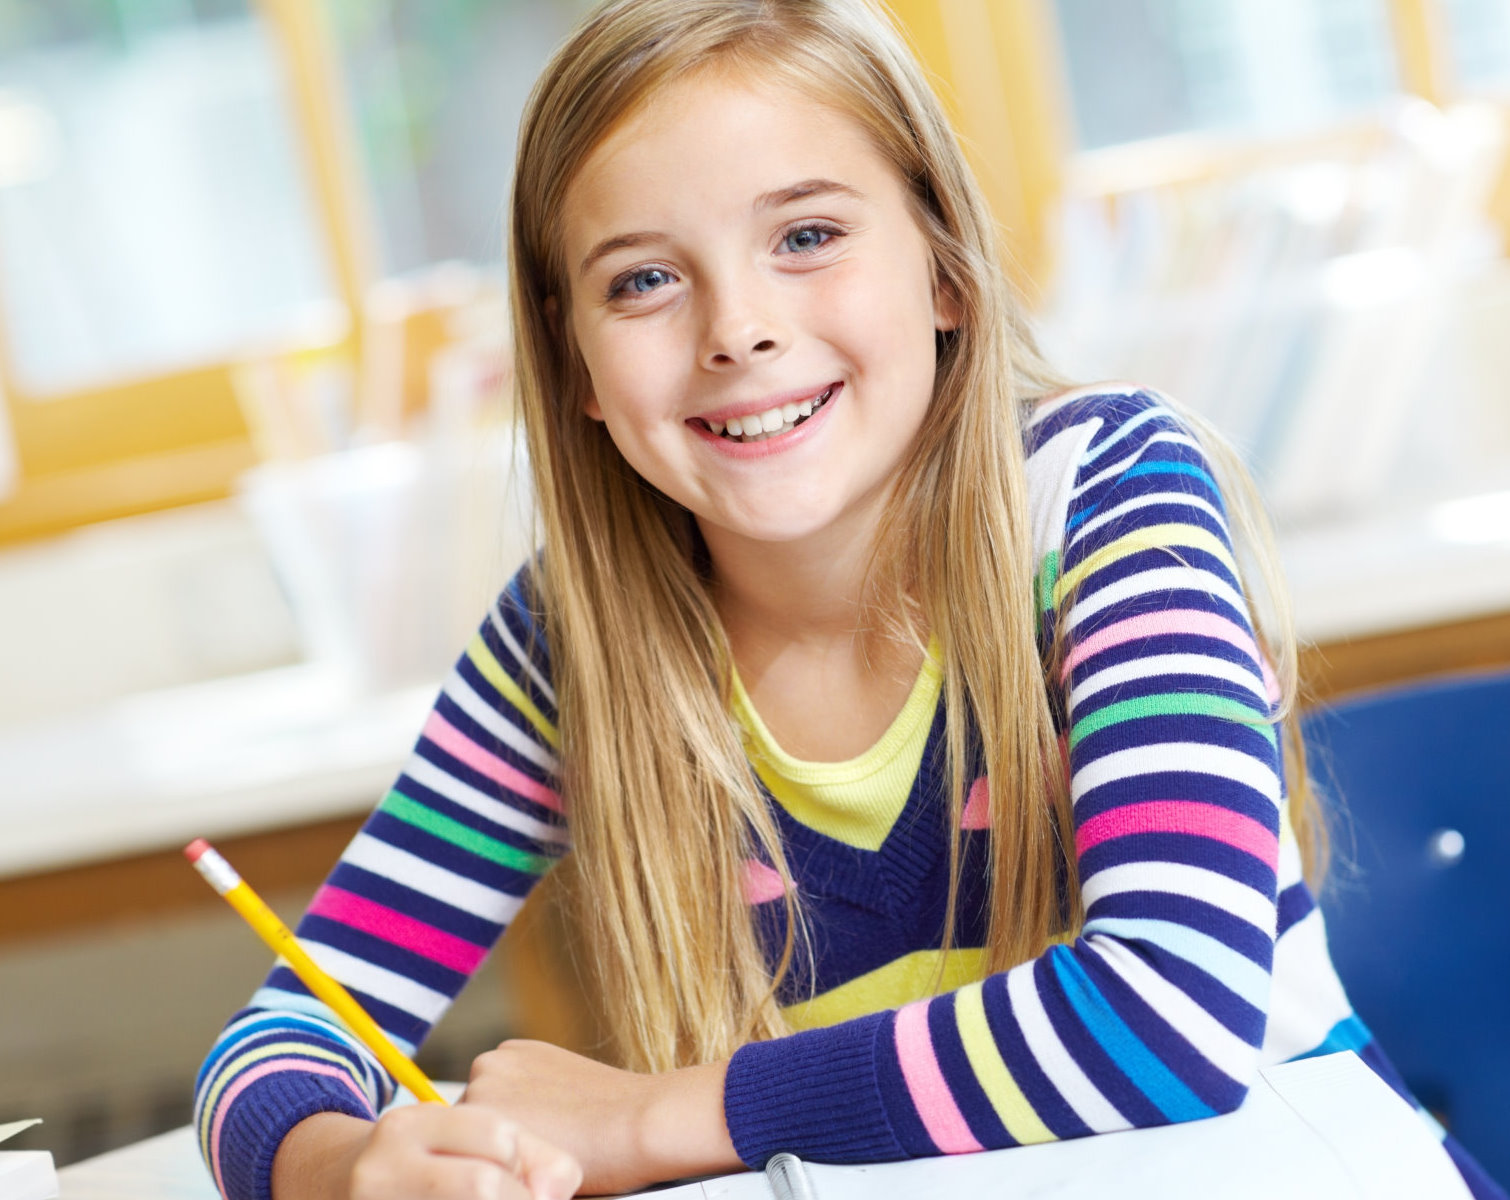 Happy girl smiling at you while writing in her notebook at school - copyspace